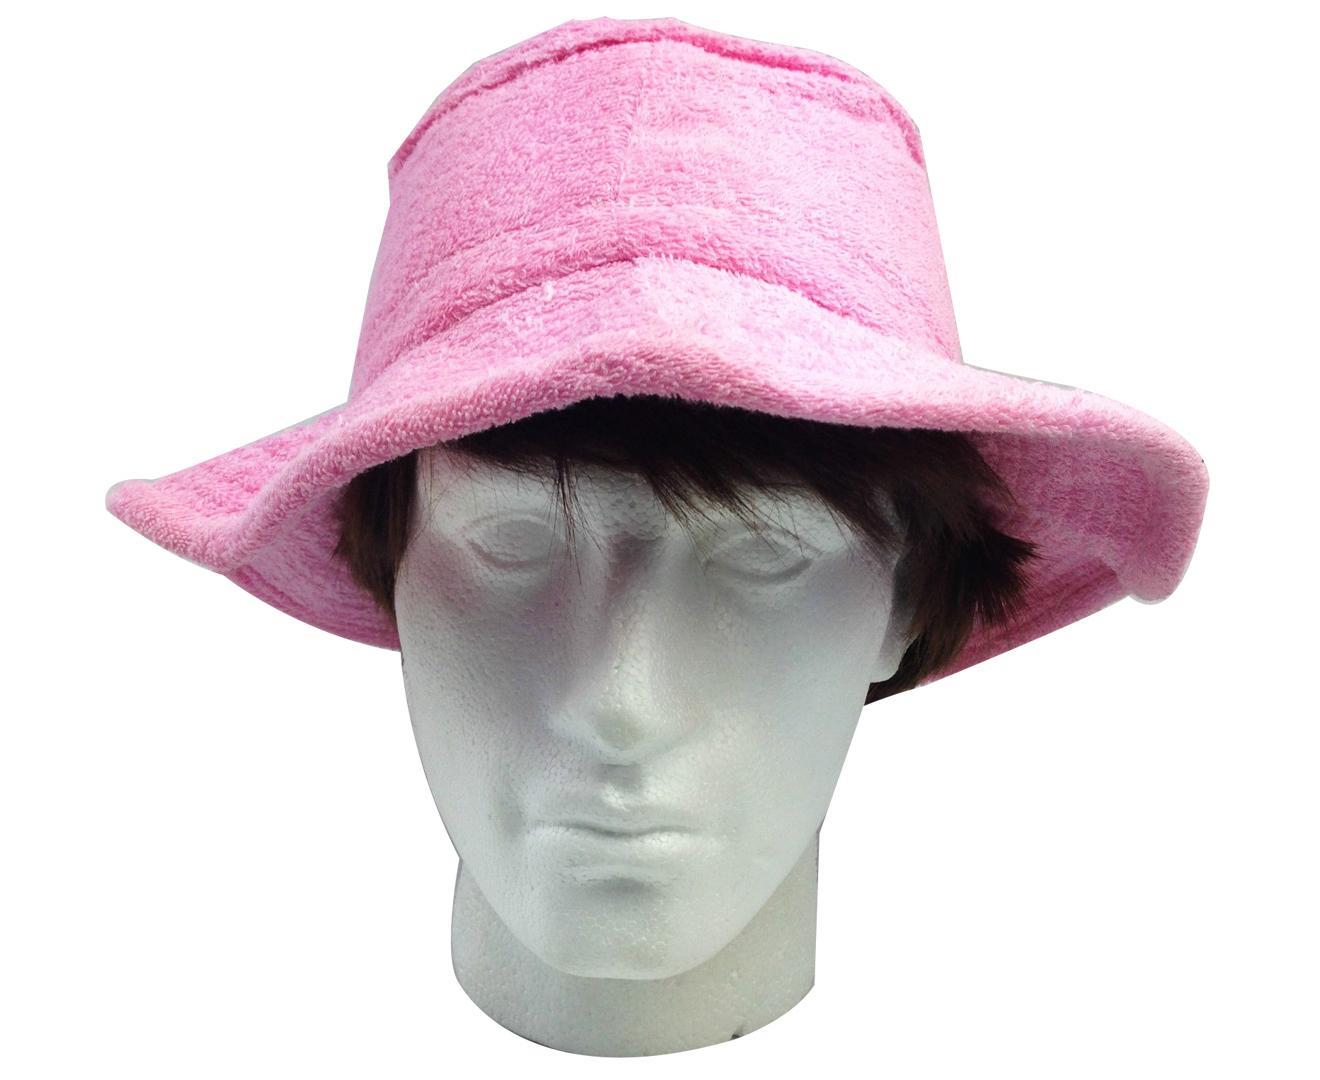 Terry Towelling BUCKET HAT Daggy Fishing Camping Lad Cap Retro 100% COTTON - Pink - X-Large